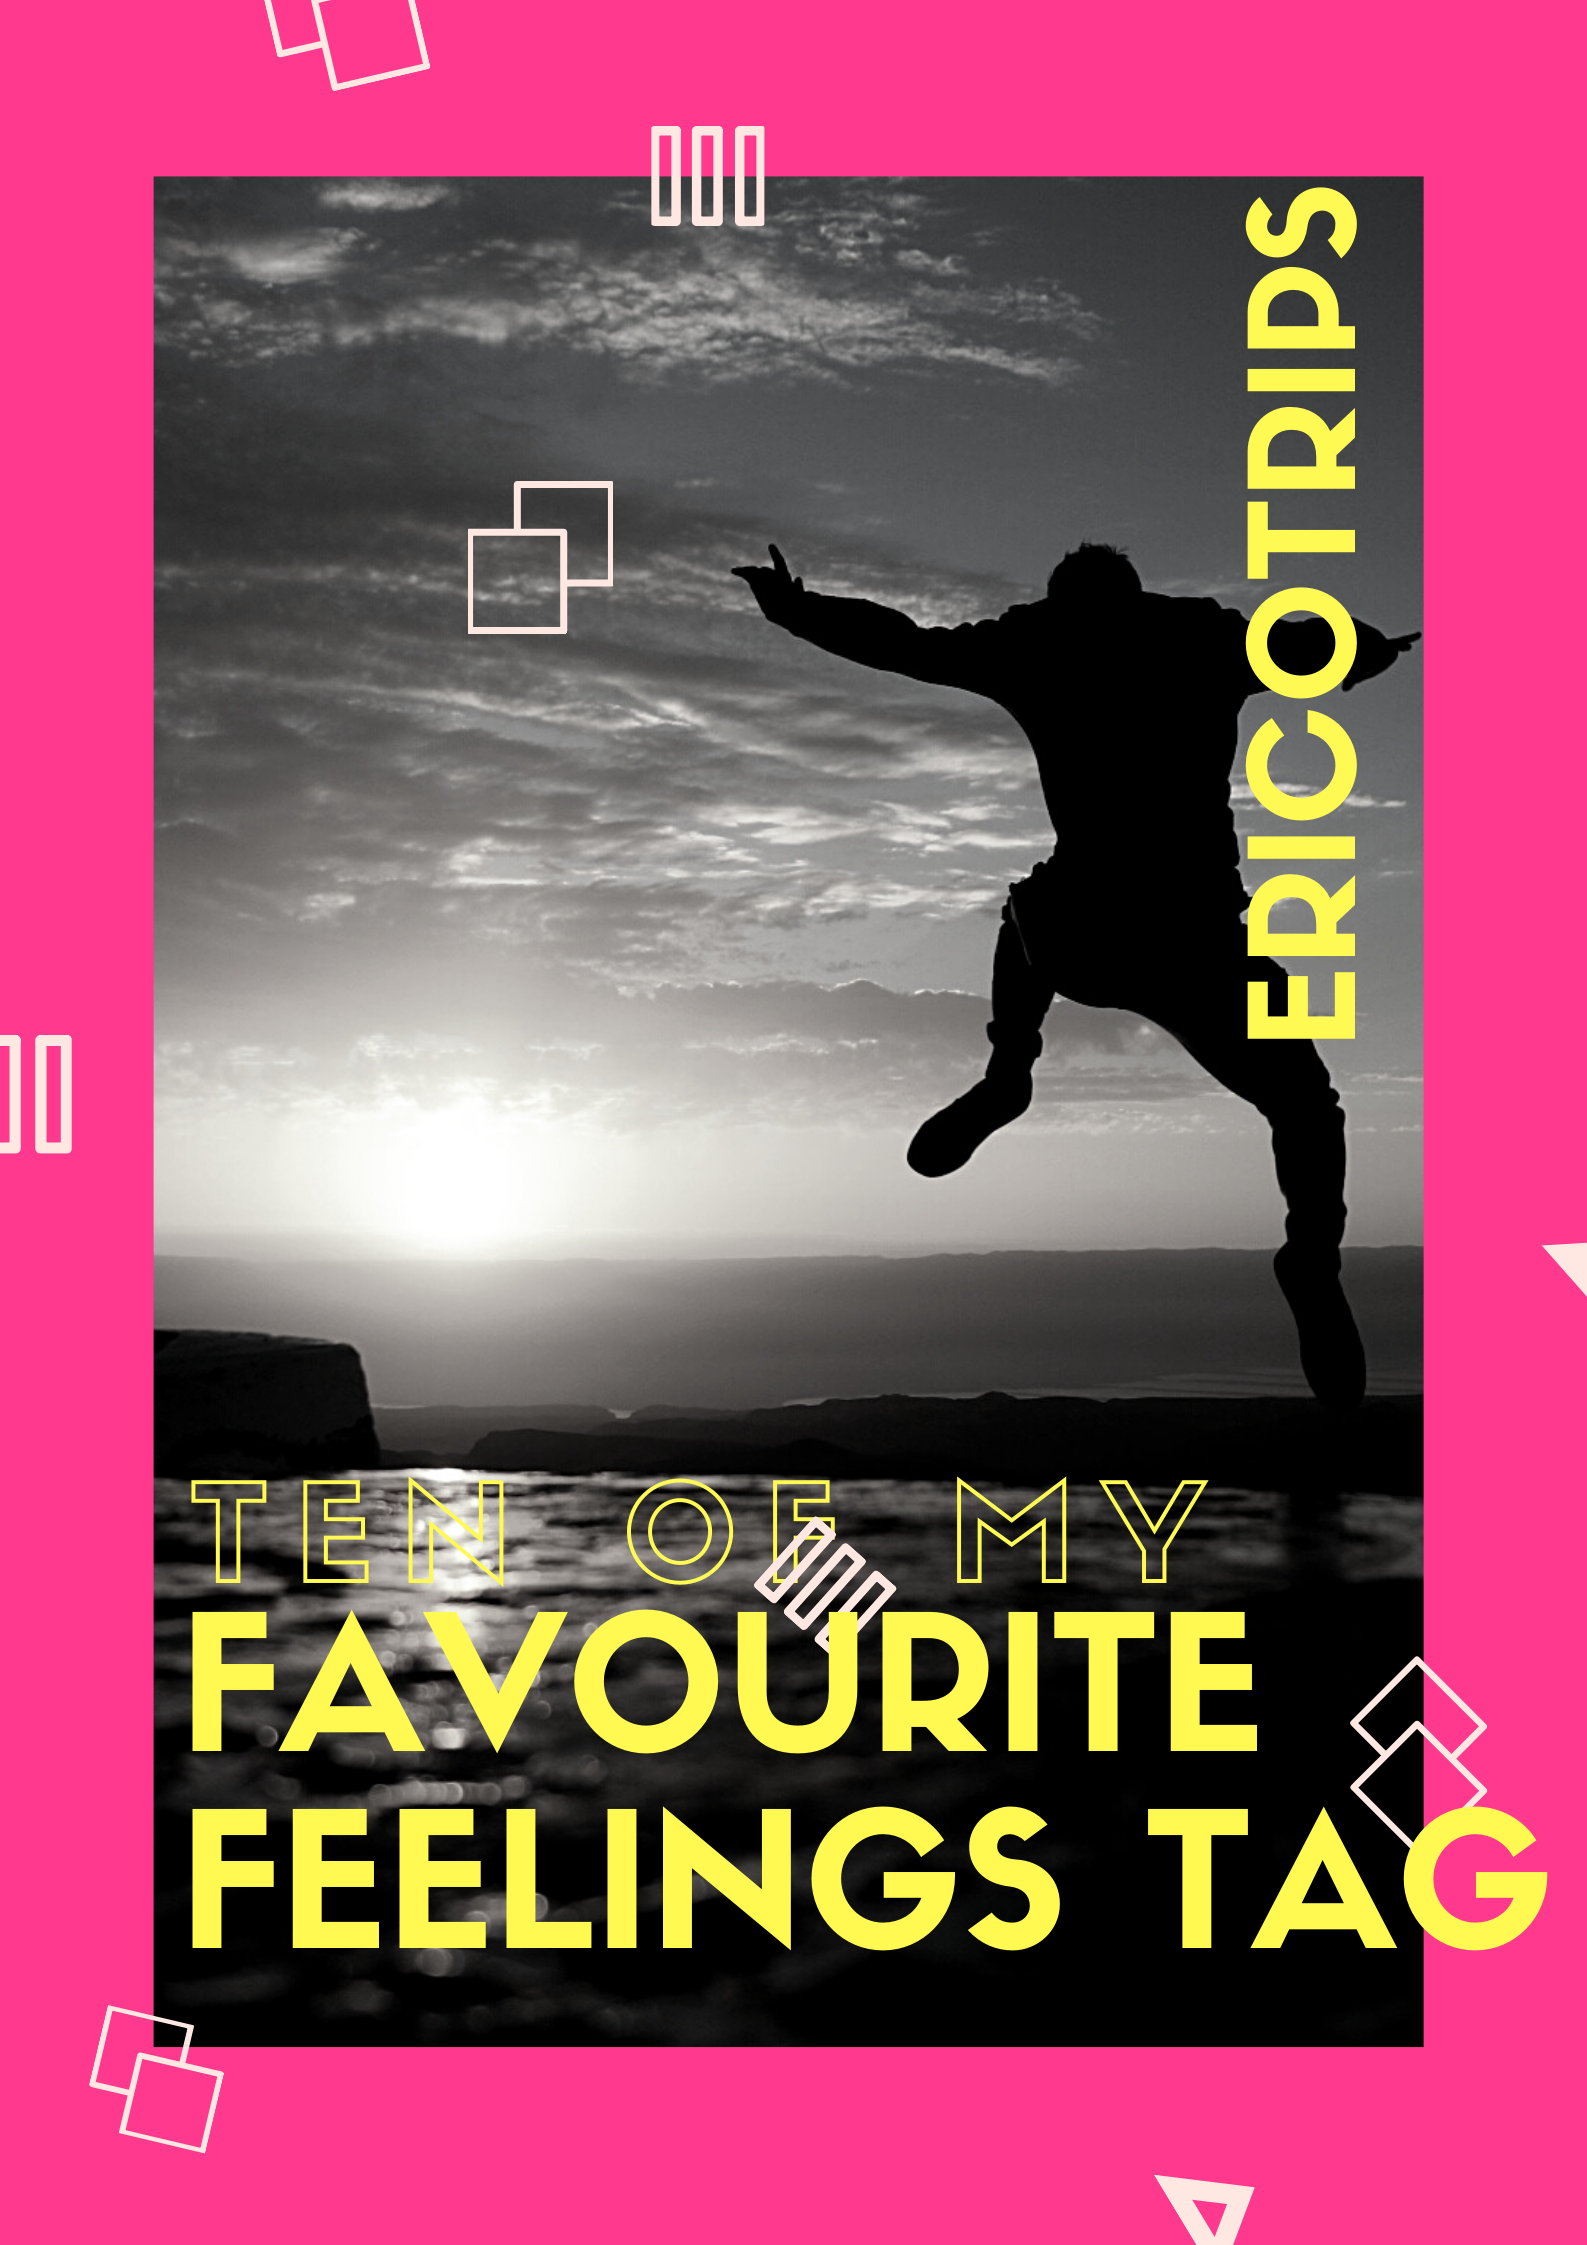 My favourite feelings tag ericotrips